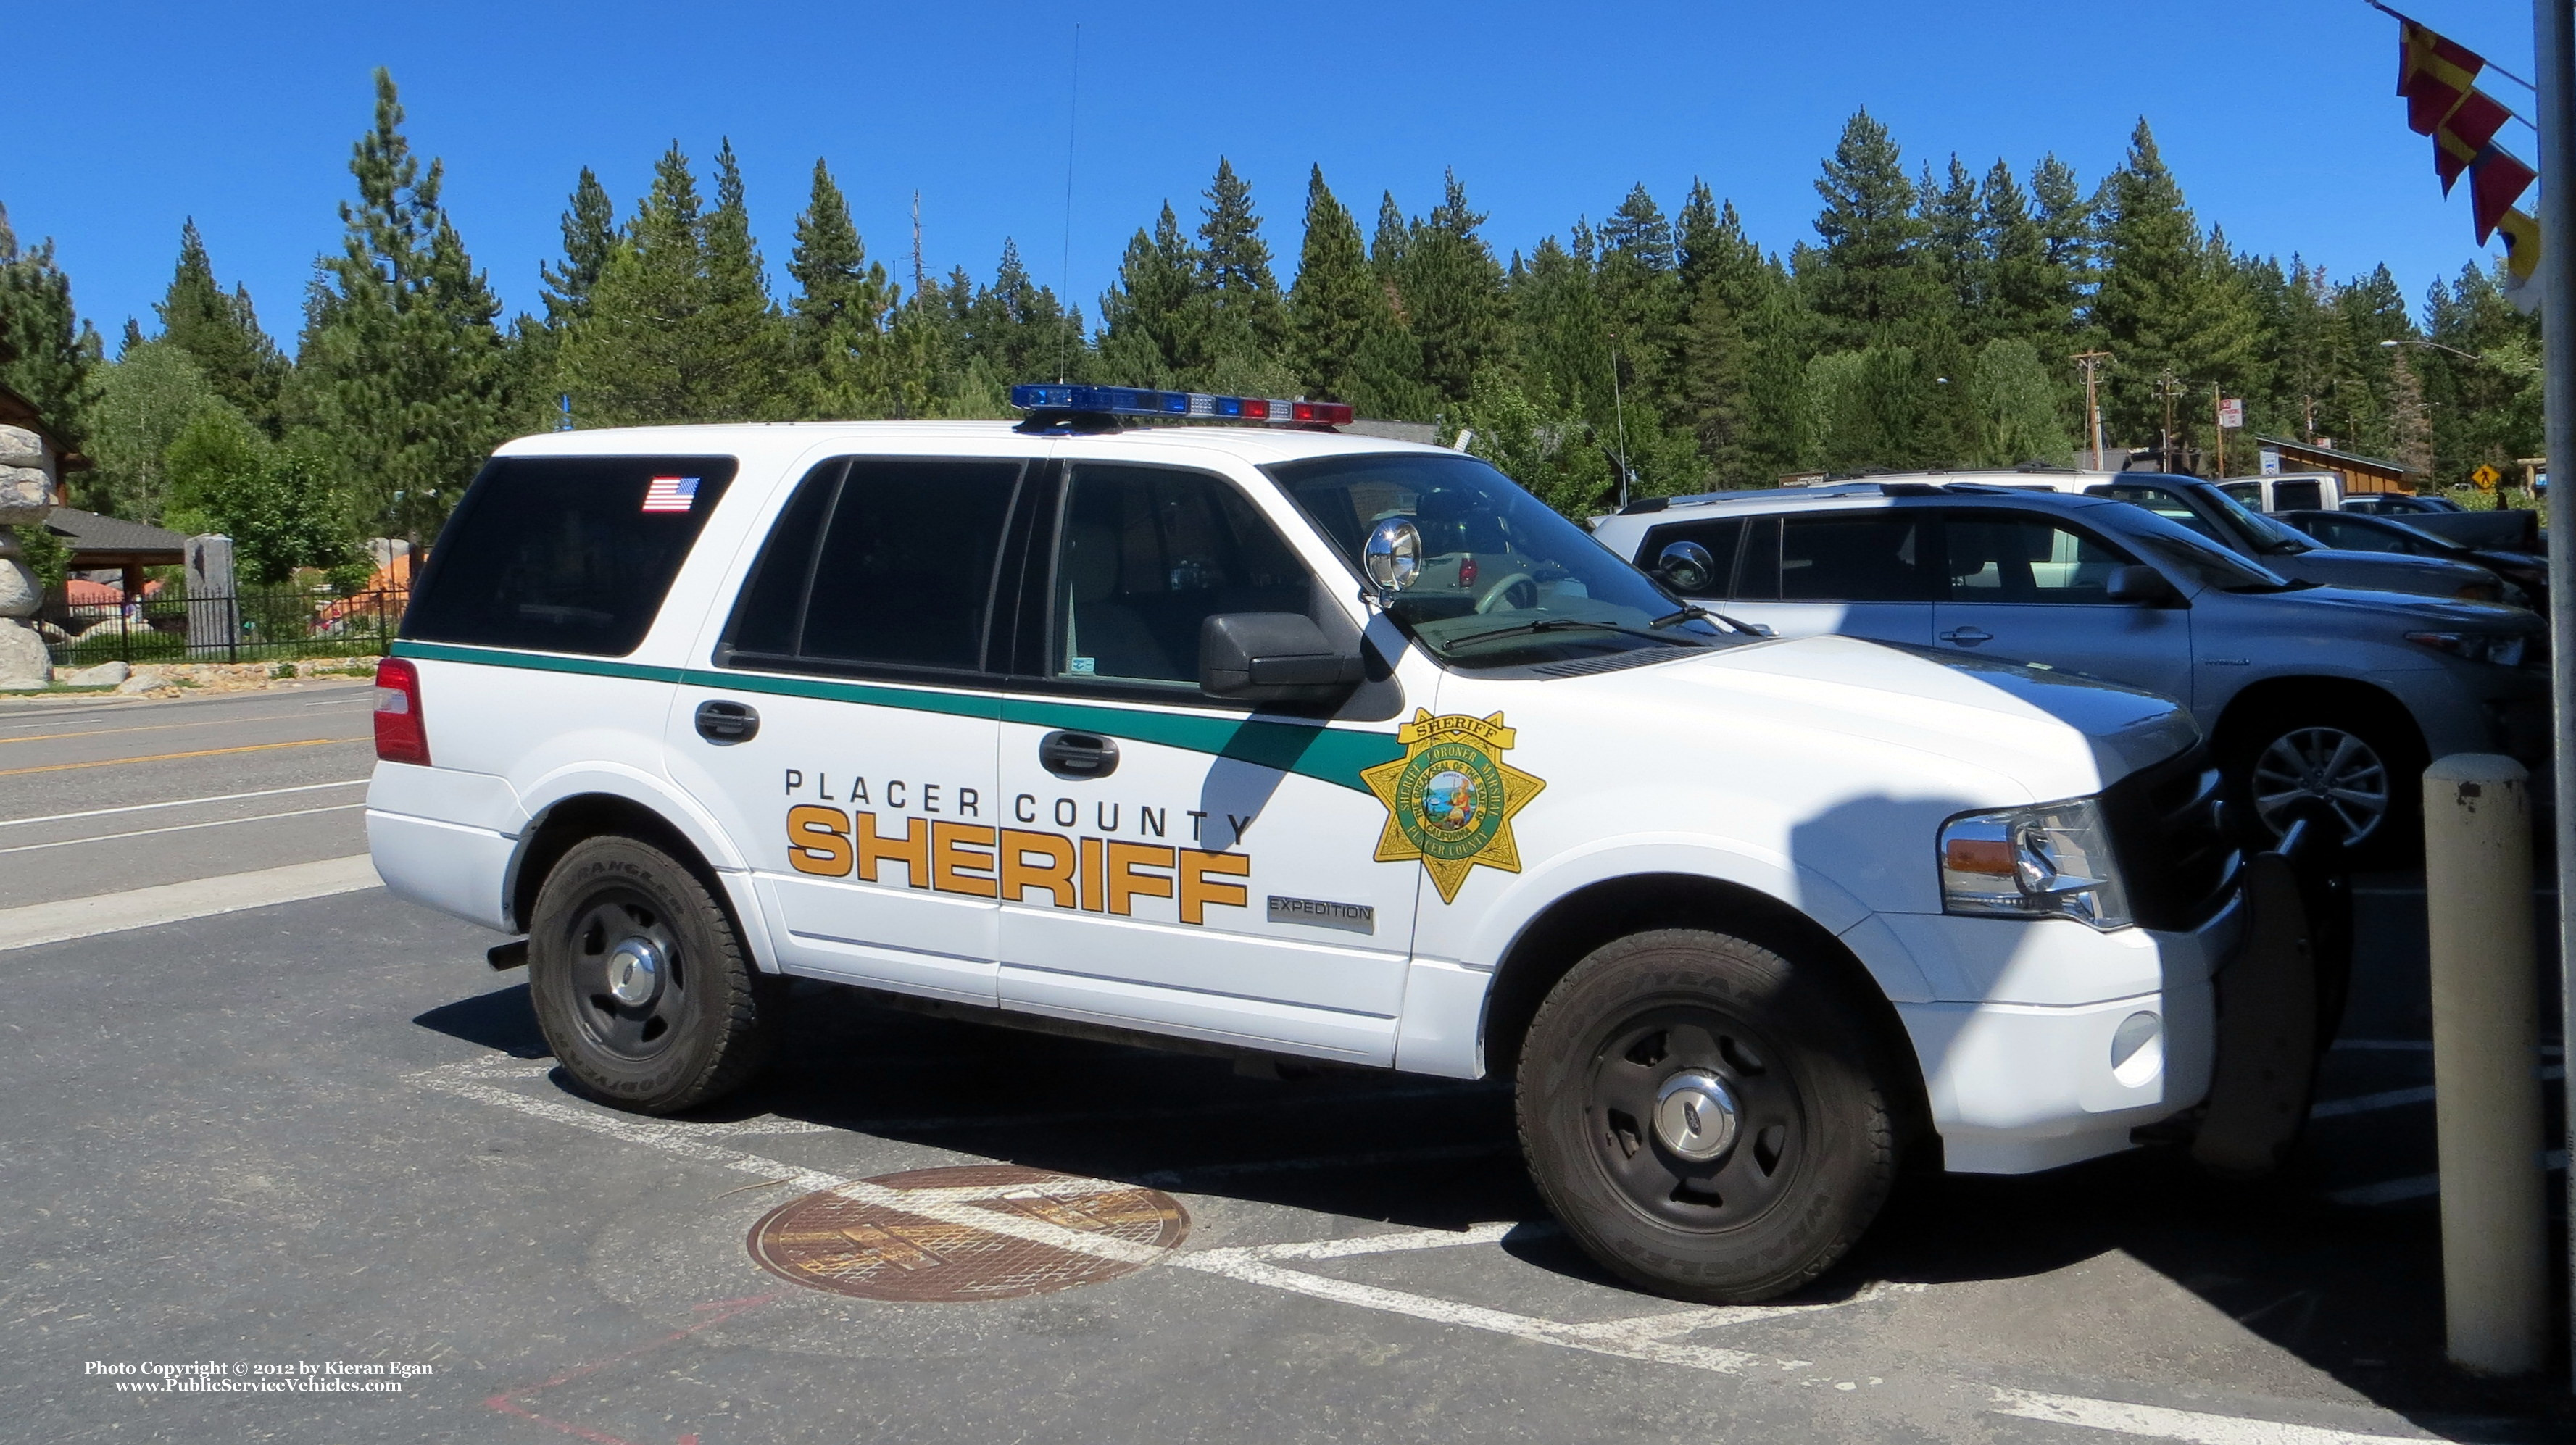 A photo  of Placer County Sheriff
            Cruiser 376, a 2008 Ford Expedition             taken by Kieran Egan